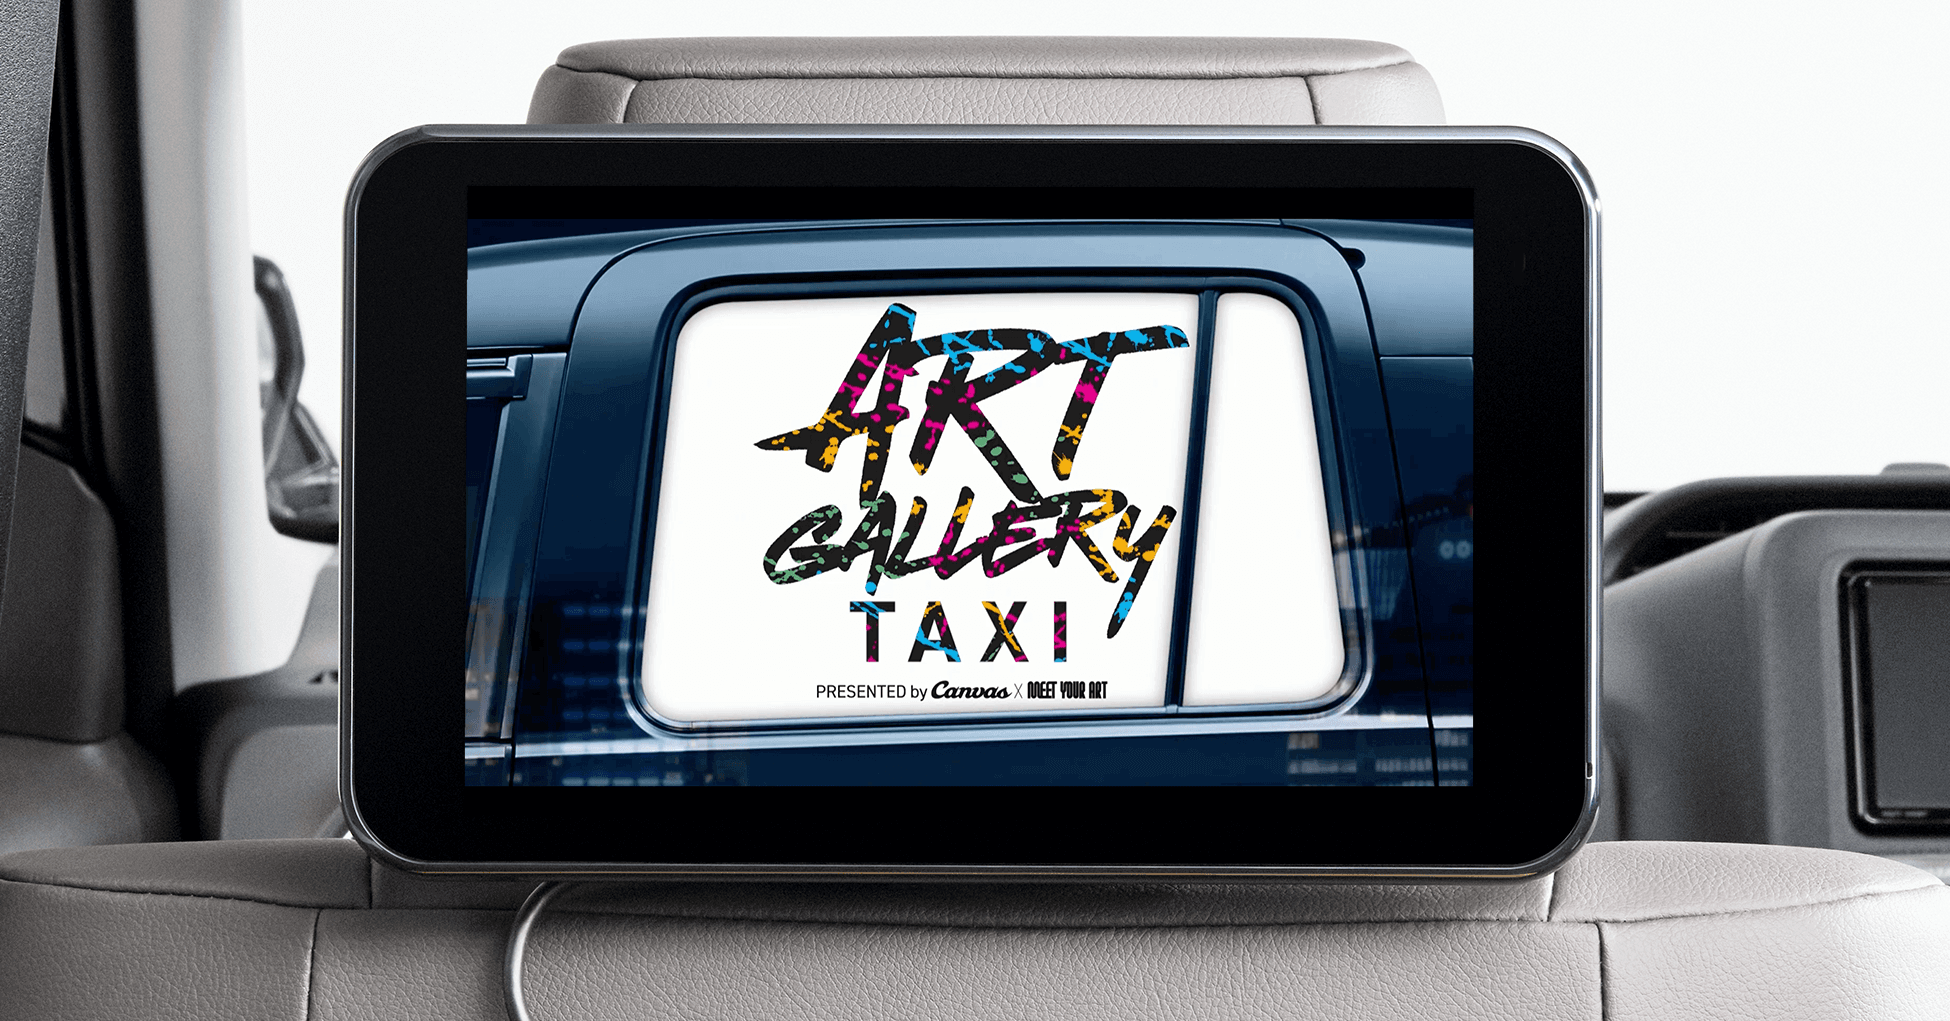 ART GALLERY TAXI2